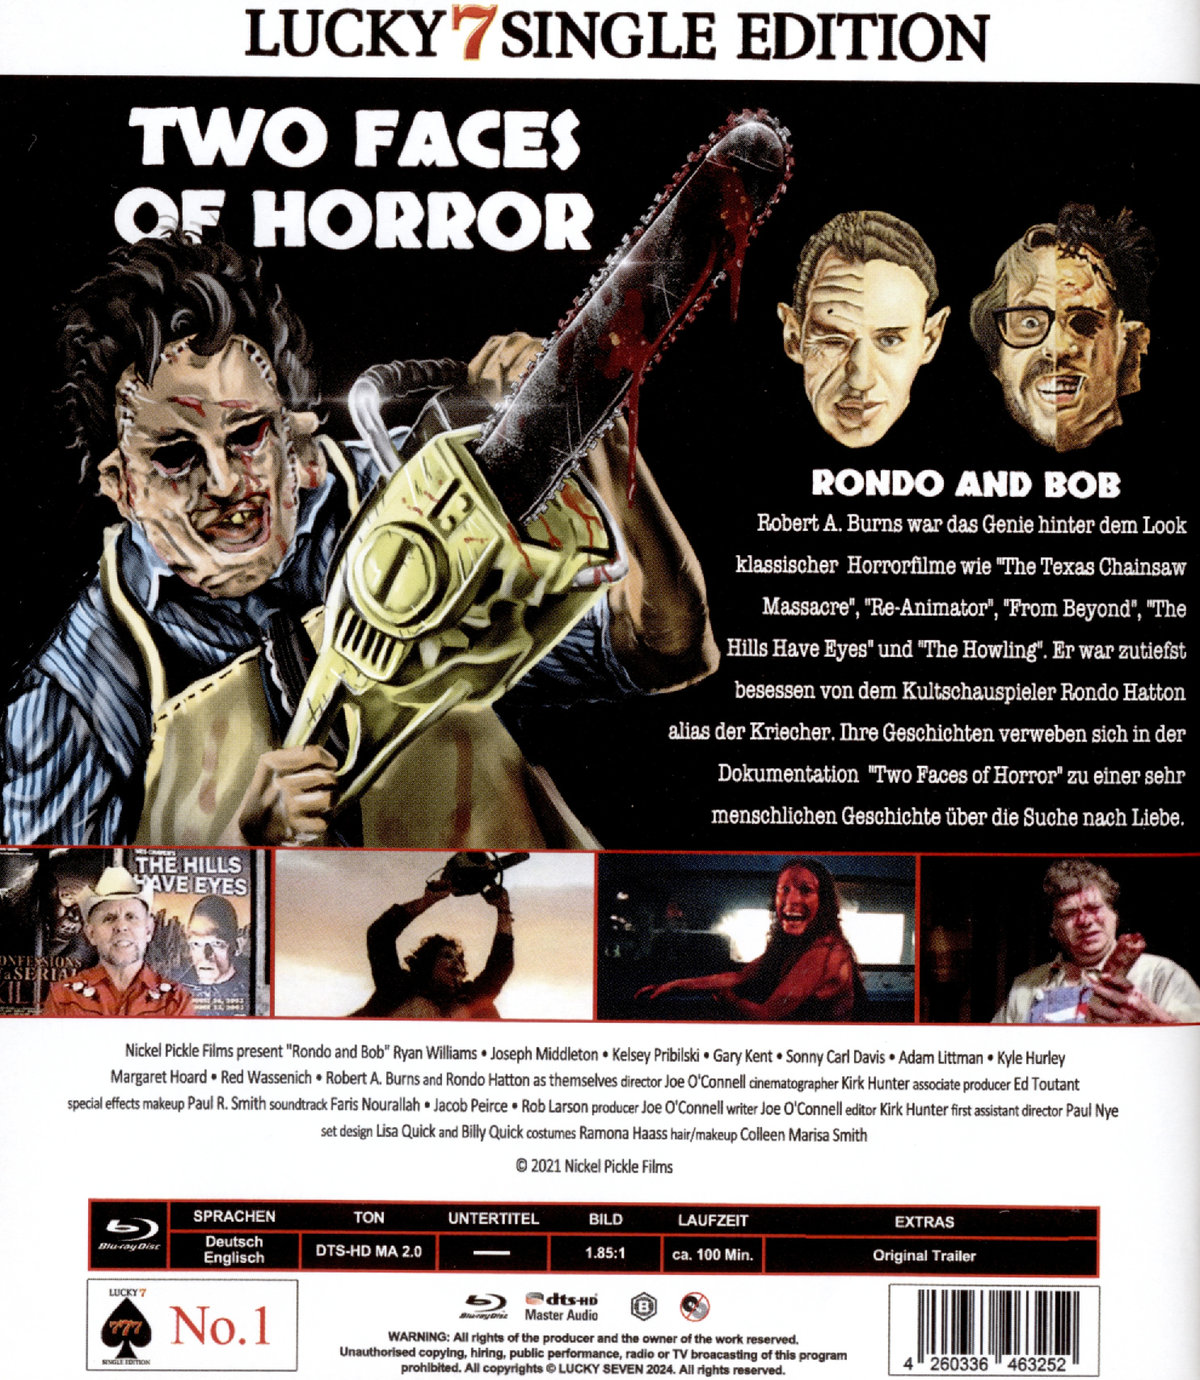 Two Faces of Horror: Rondo Hatton and Robert A. Burns - Uncut Edition  (blu-ray)